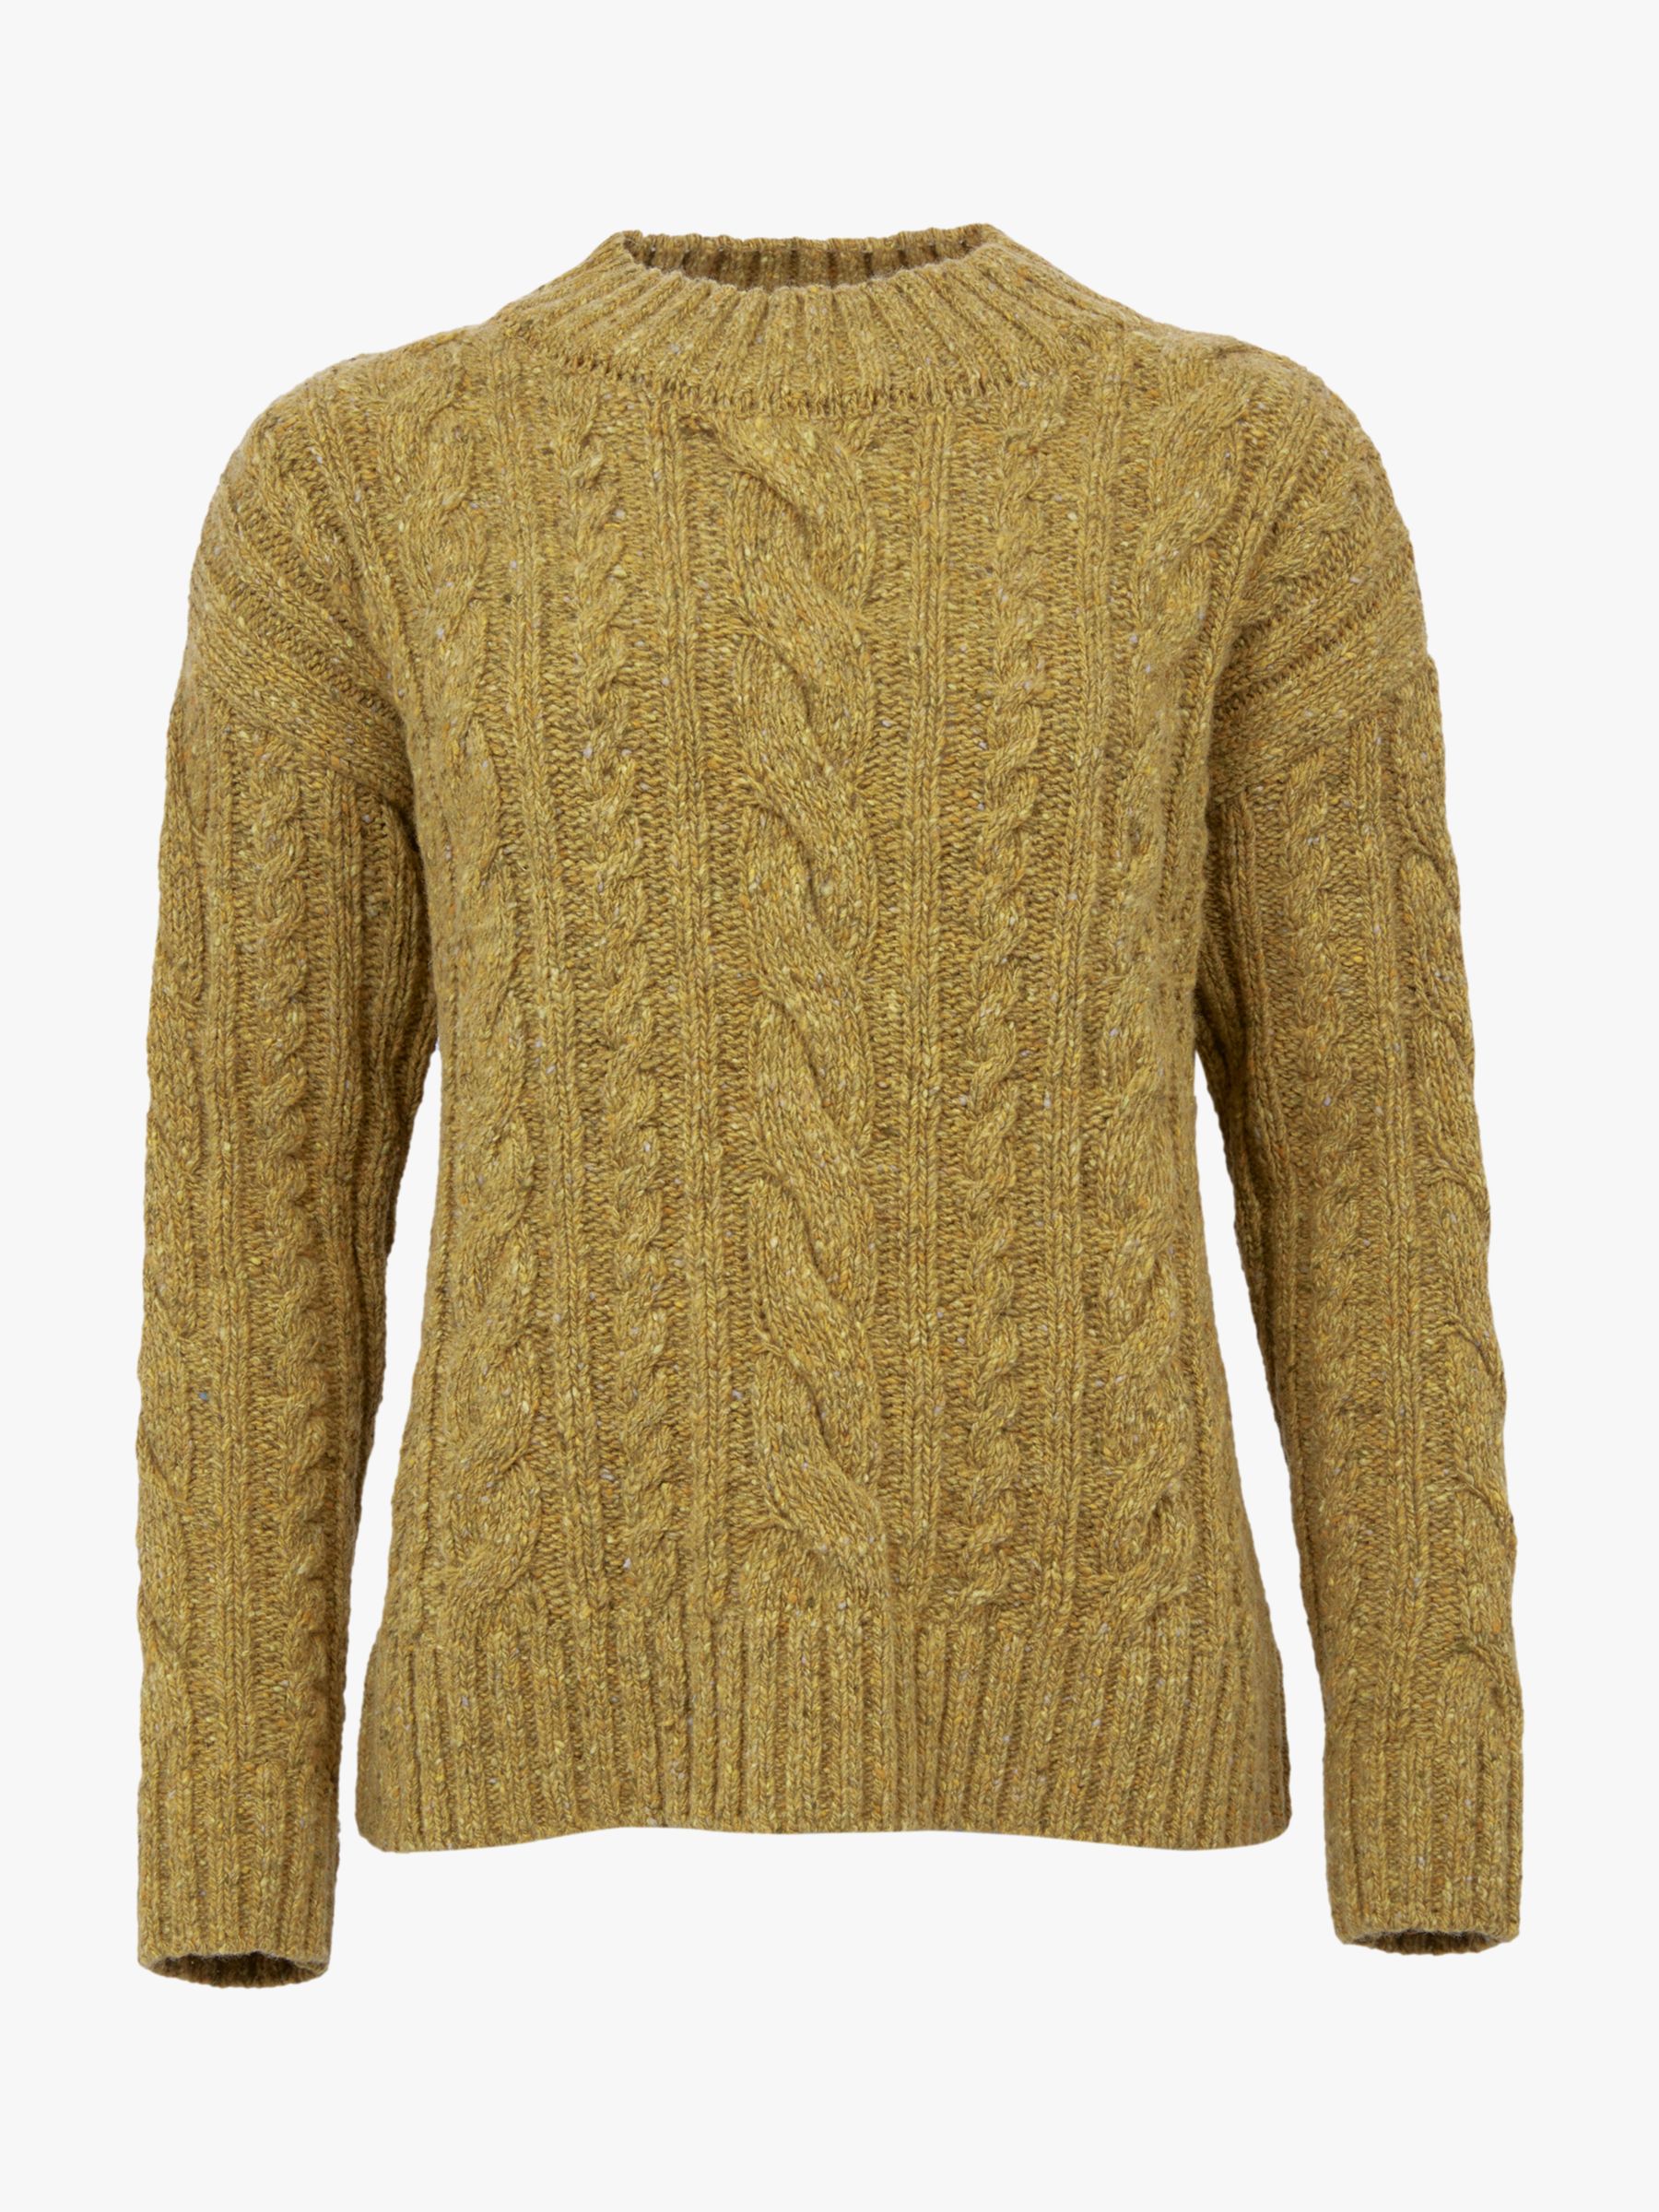 Buy Celtic & Co. Donegal Cable Crew Jumper Online at johnlewis.com